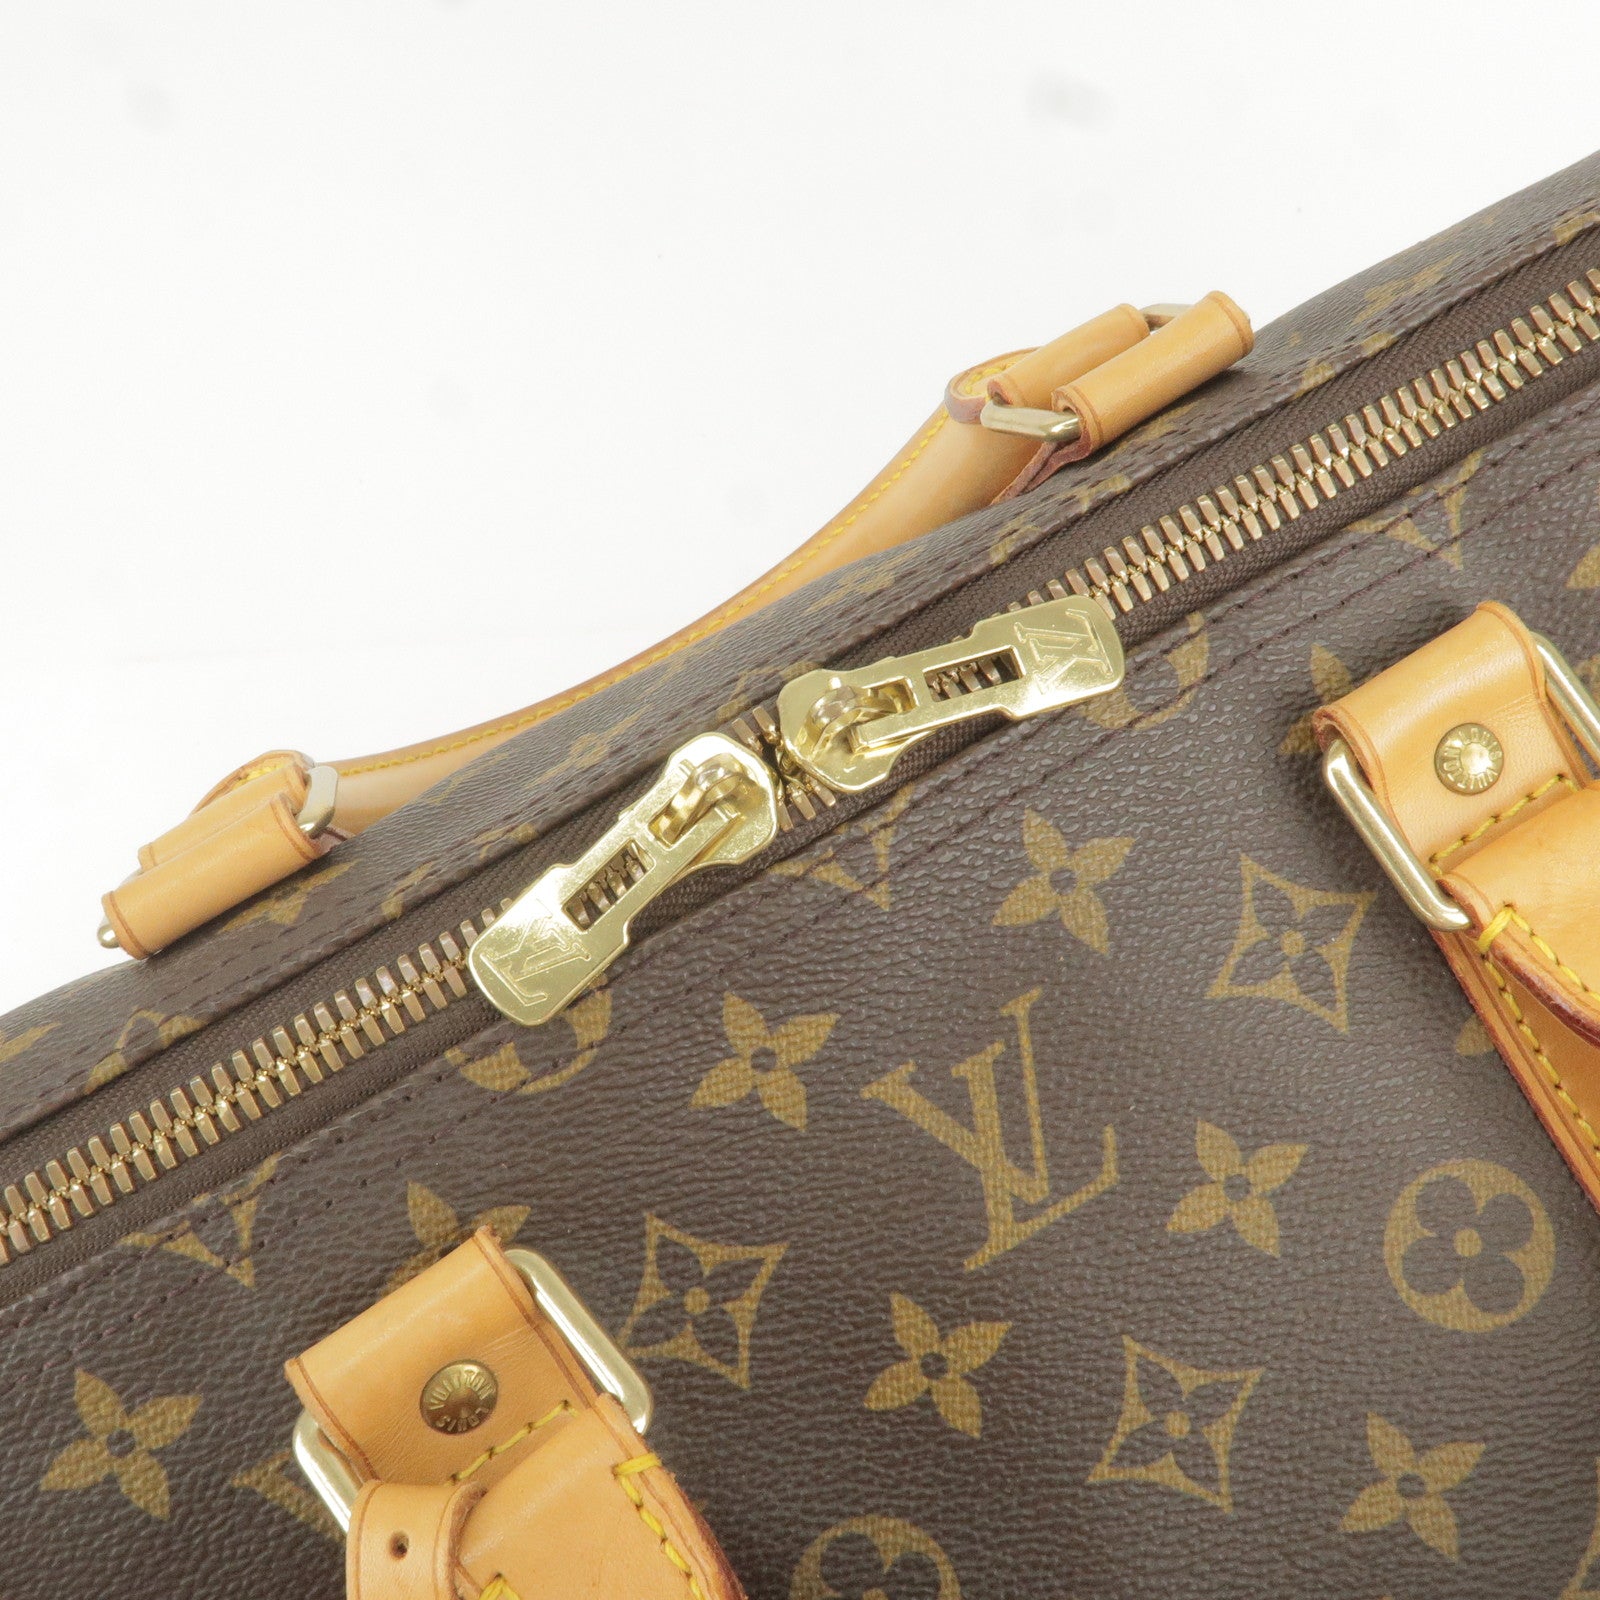 2 FAB LOUIS VUITTON SHOE BAGS TLV 44 20 THE FRENCH COMPANY WITH LABELS